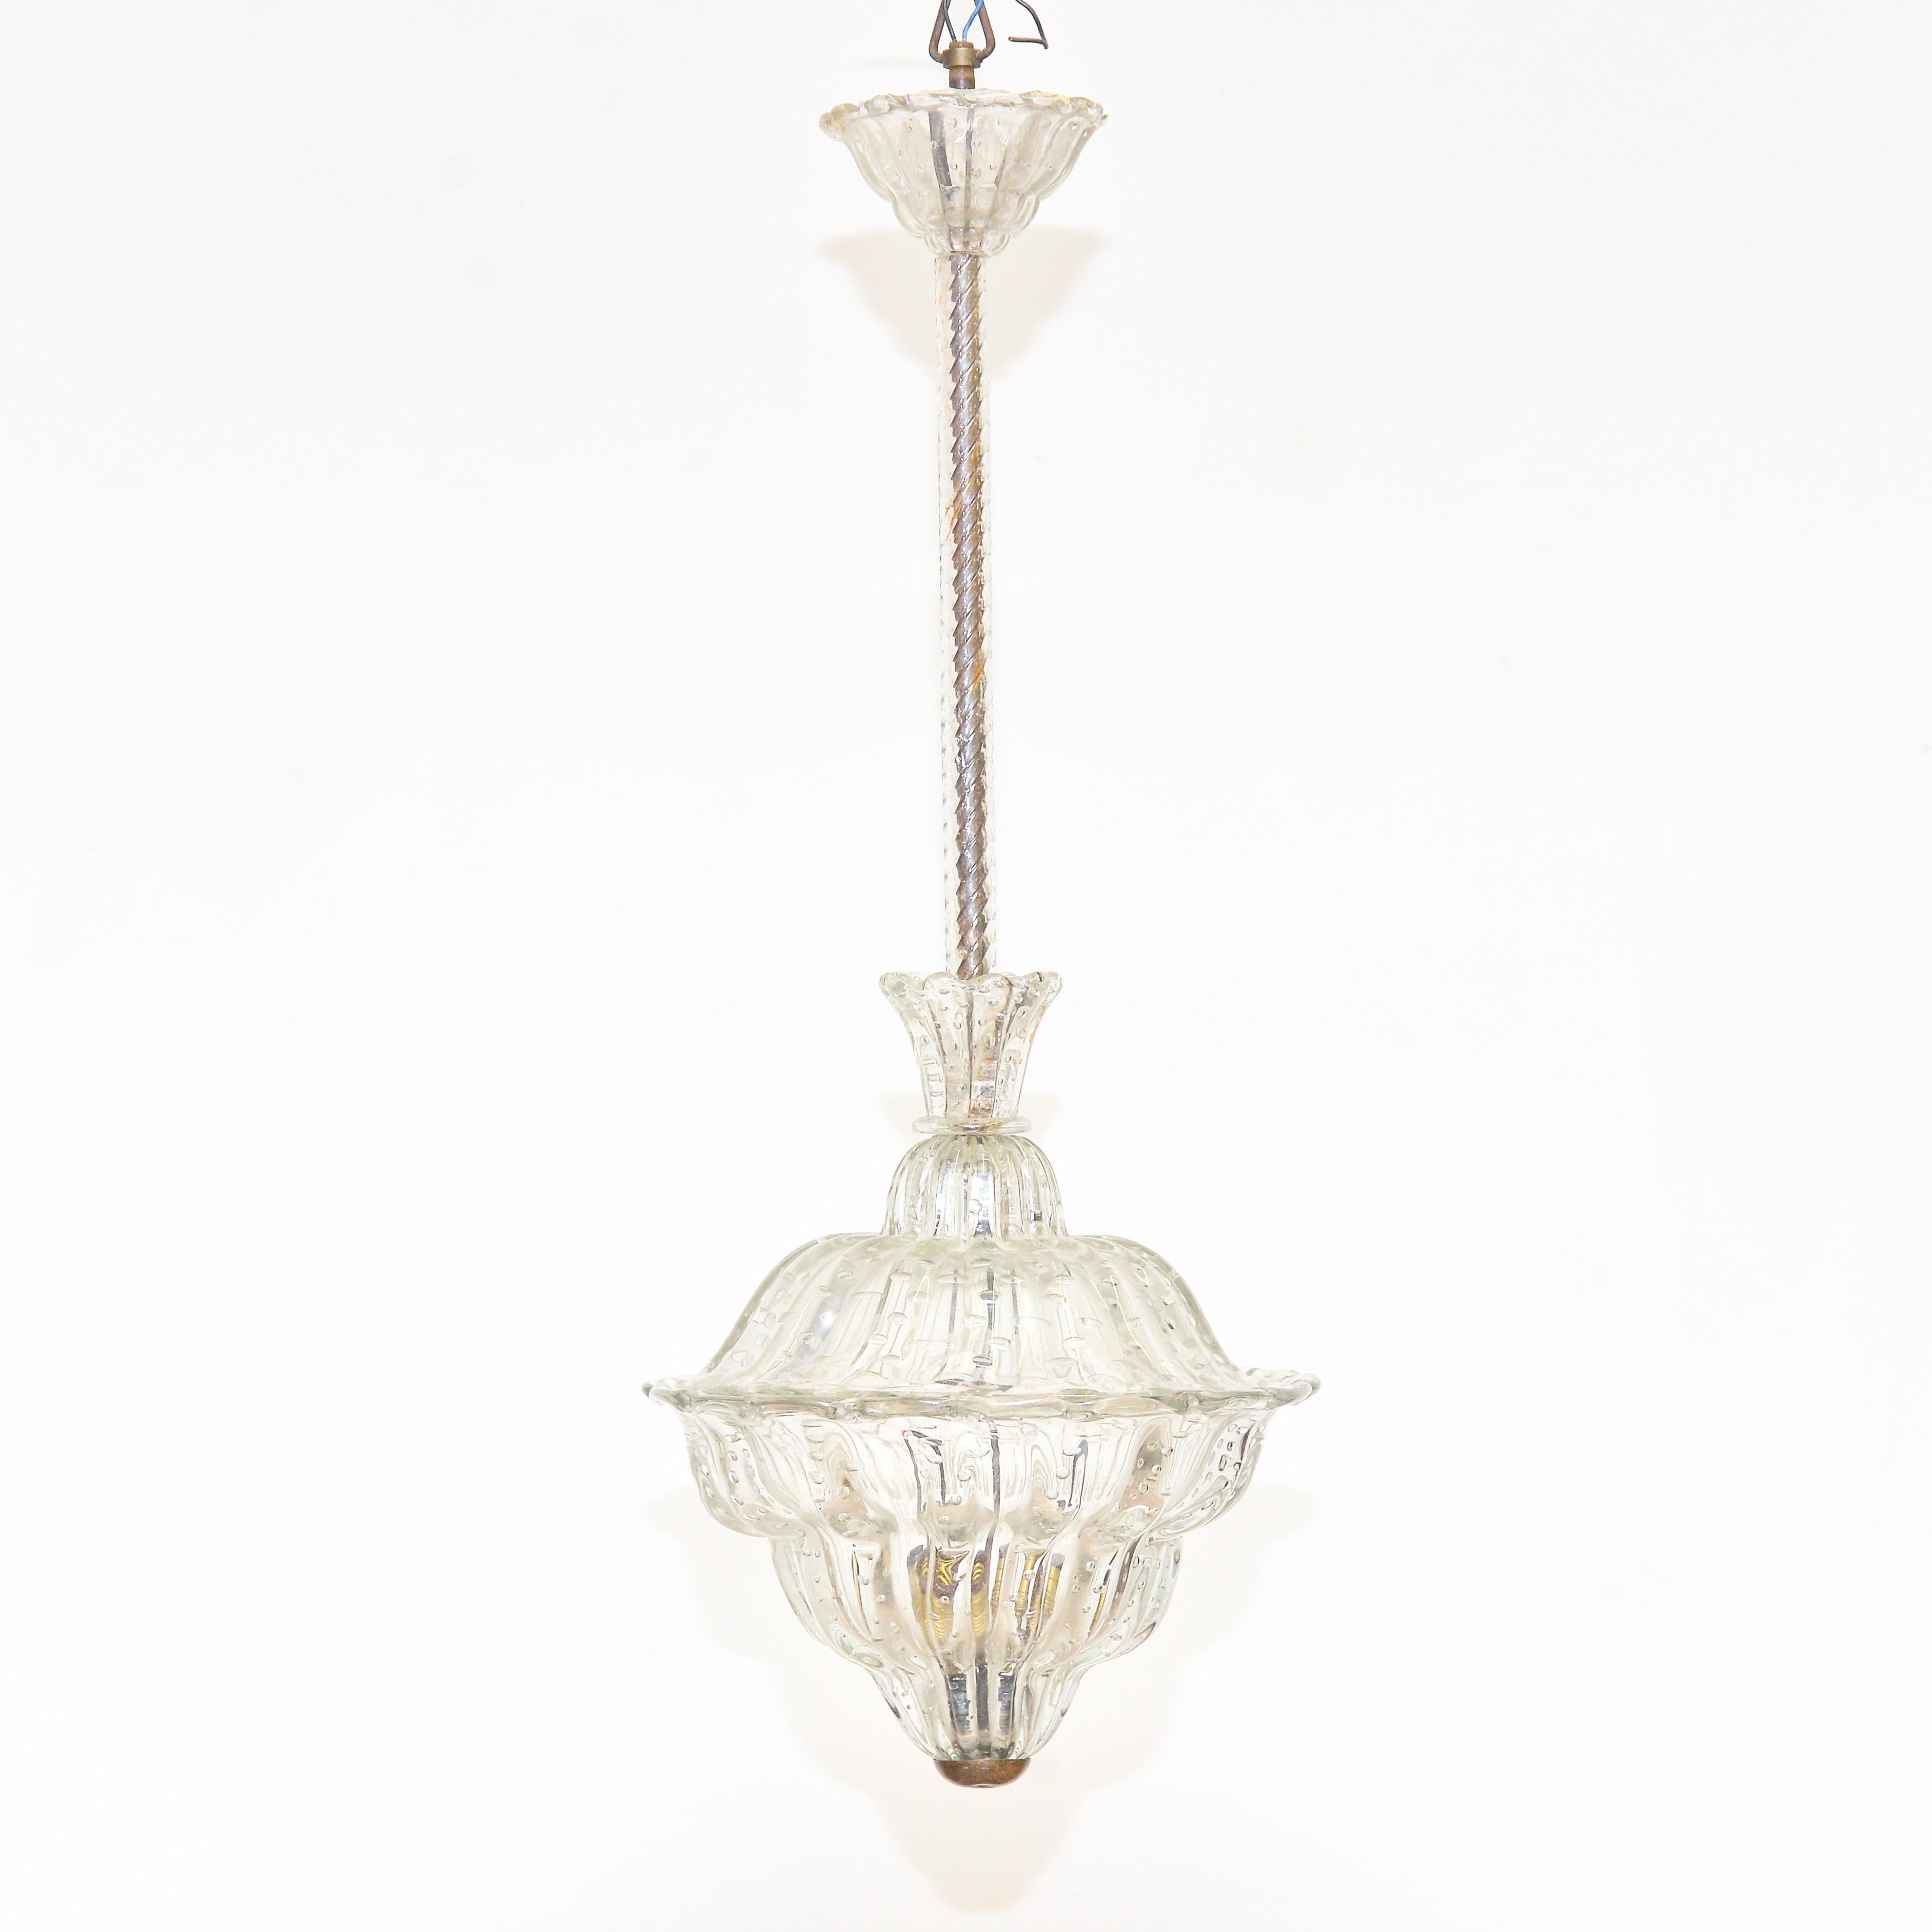 Amazing lantern of incredible beauty in massive Murano glass with inclusions of gold. From private collection by Barone Von Plant.
 